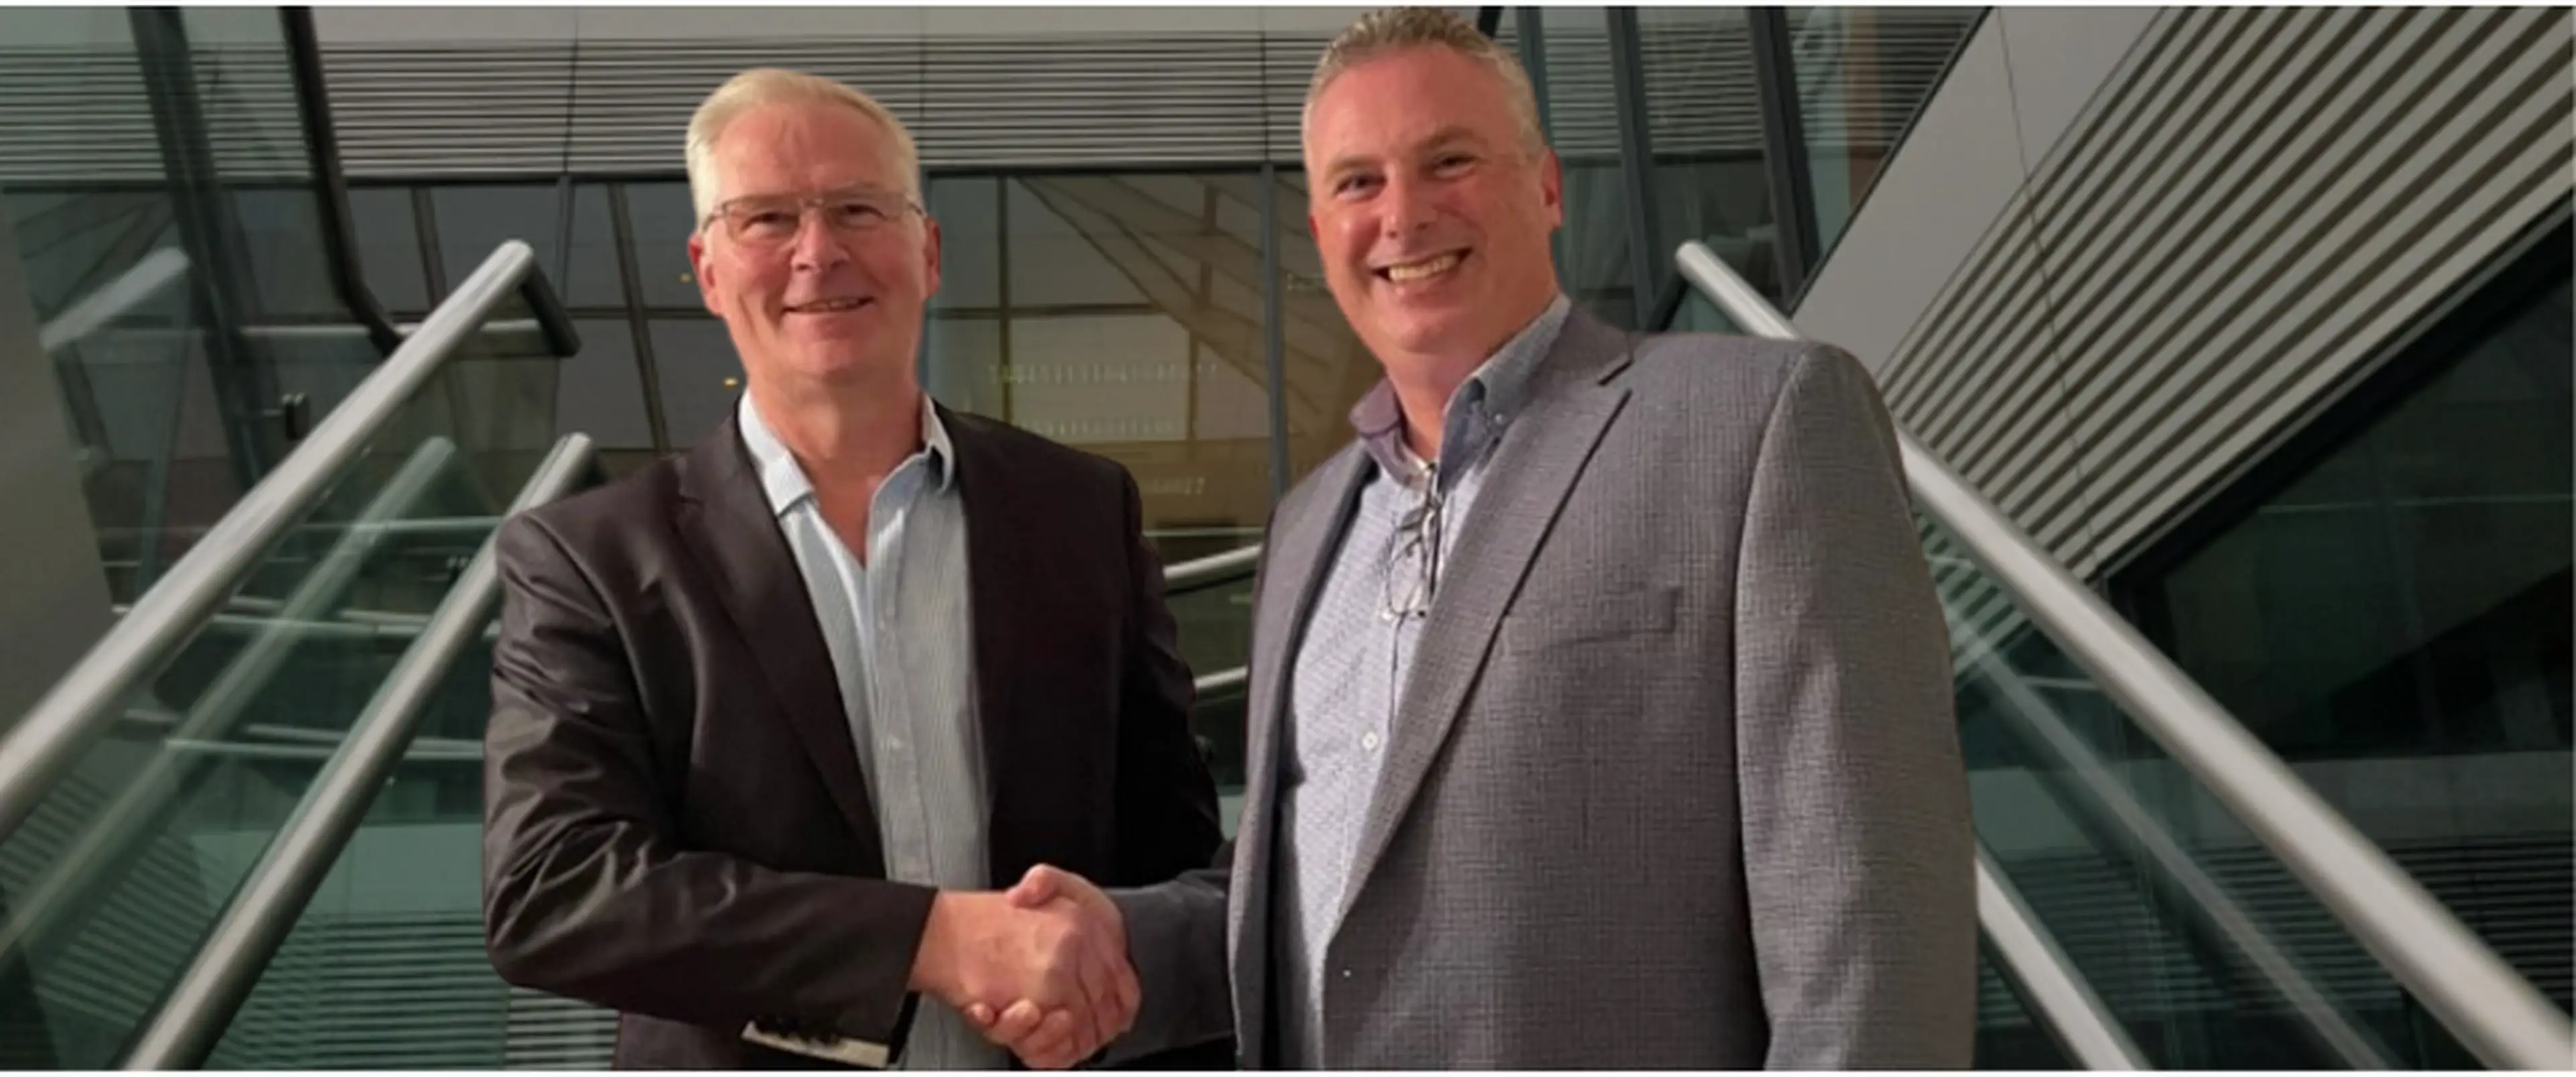 Karl Andersson, VP of Development and Acquisitions Glantus Holdings Plc and Peter Welch, Managing Director Meridian Cost Benefit Ltd celebrating the acquisition. 